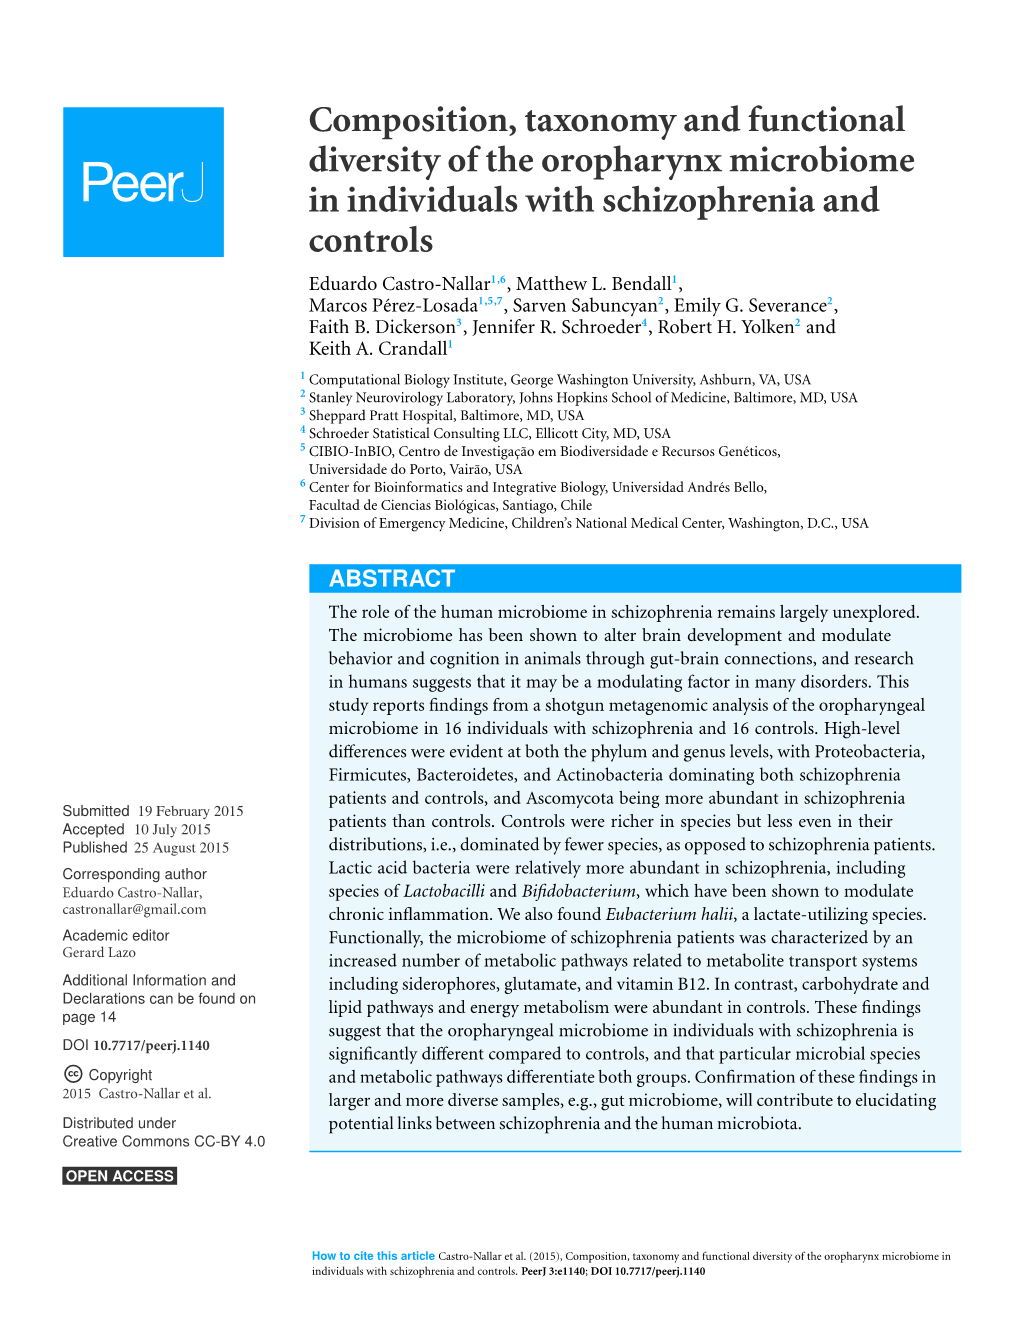 Composition, Taxonomy and Functional Diversity of the Oropharynx Microbiome in Individuals with Schizophrenia and Controls Eduardo Castro-Nallar1,6 , Matthew L